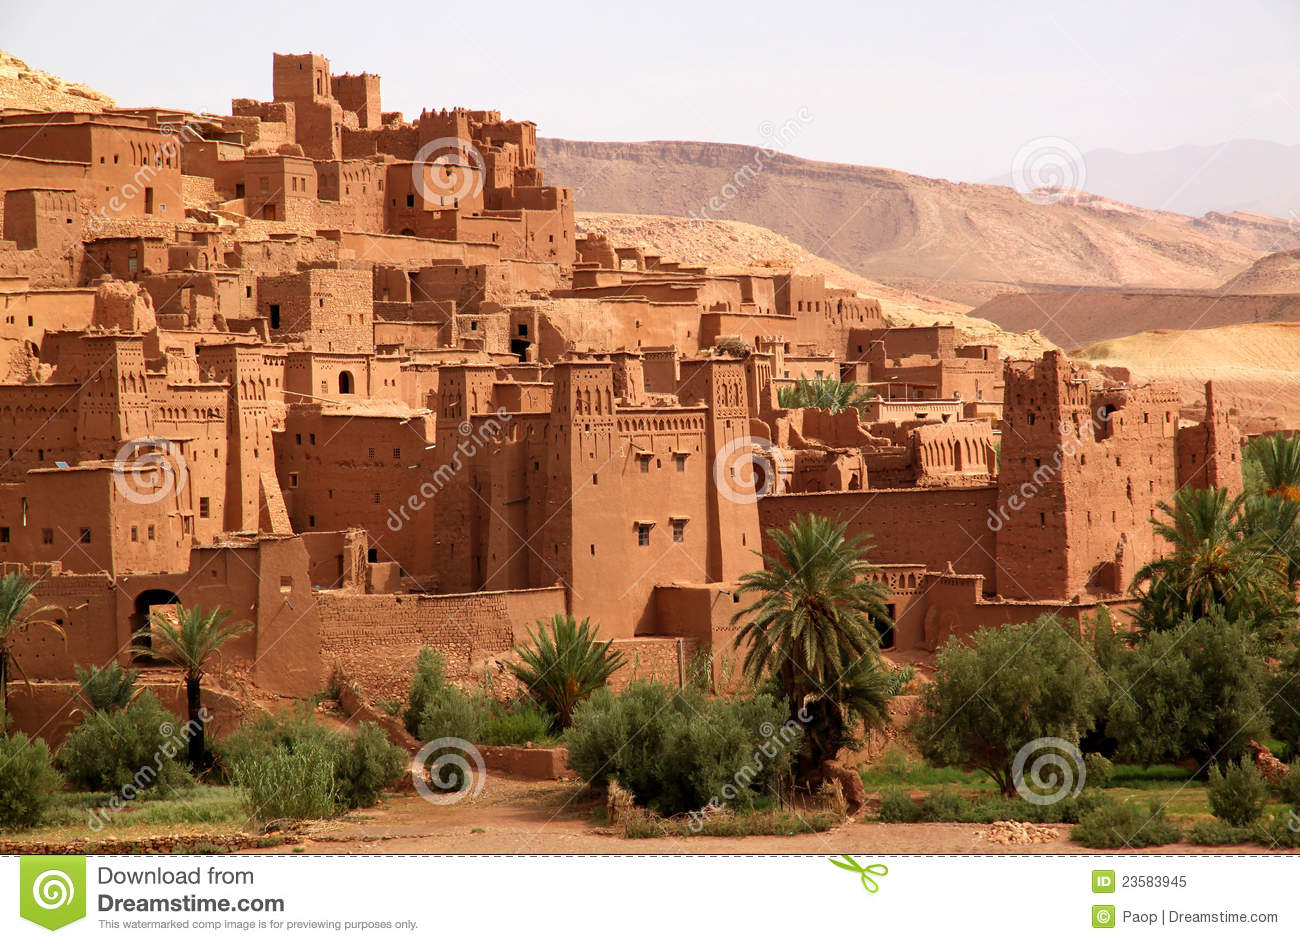 Image result for moroccan ancient